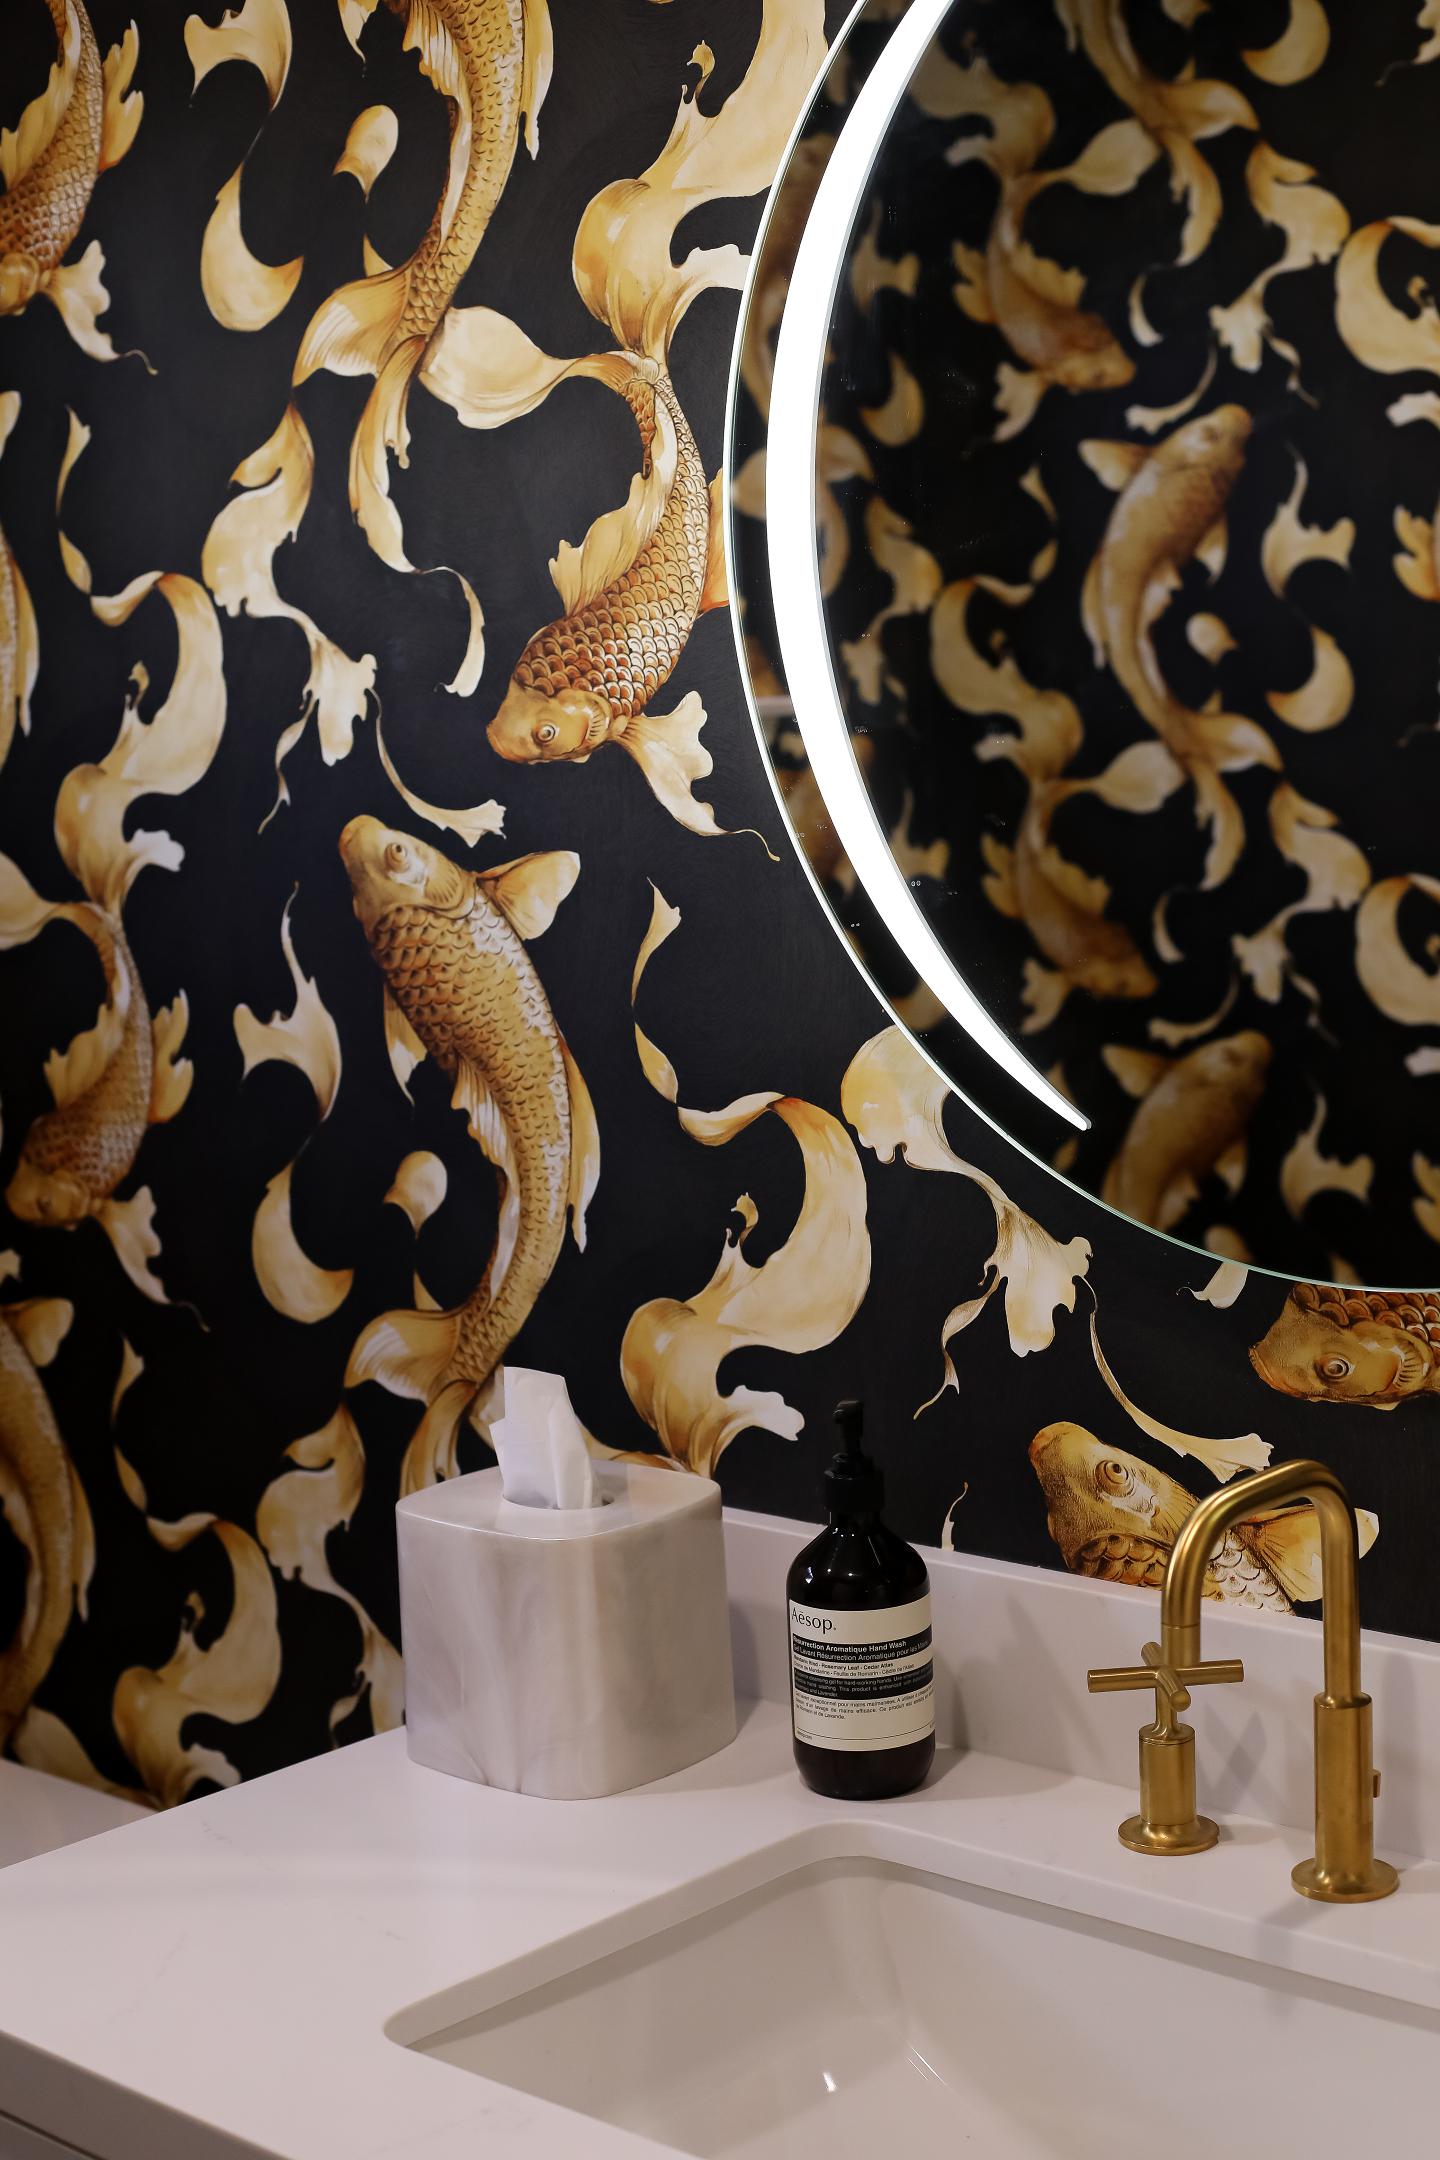 Elegant bathroom with koi fish wallpaper and gold fixtures.